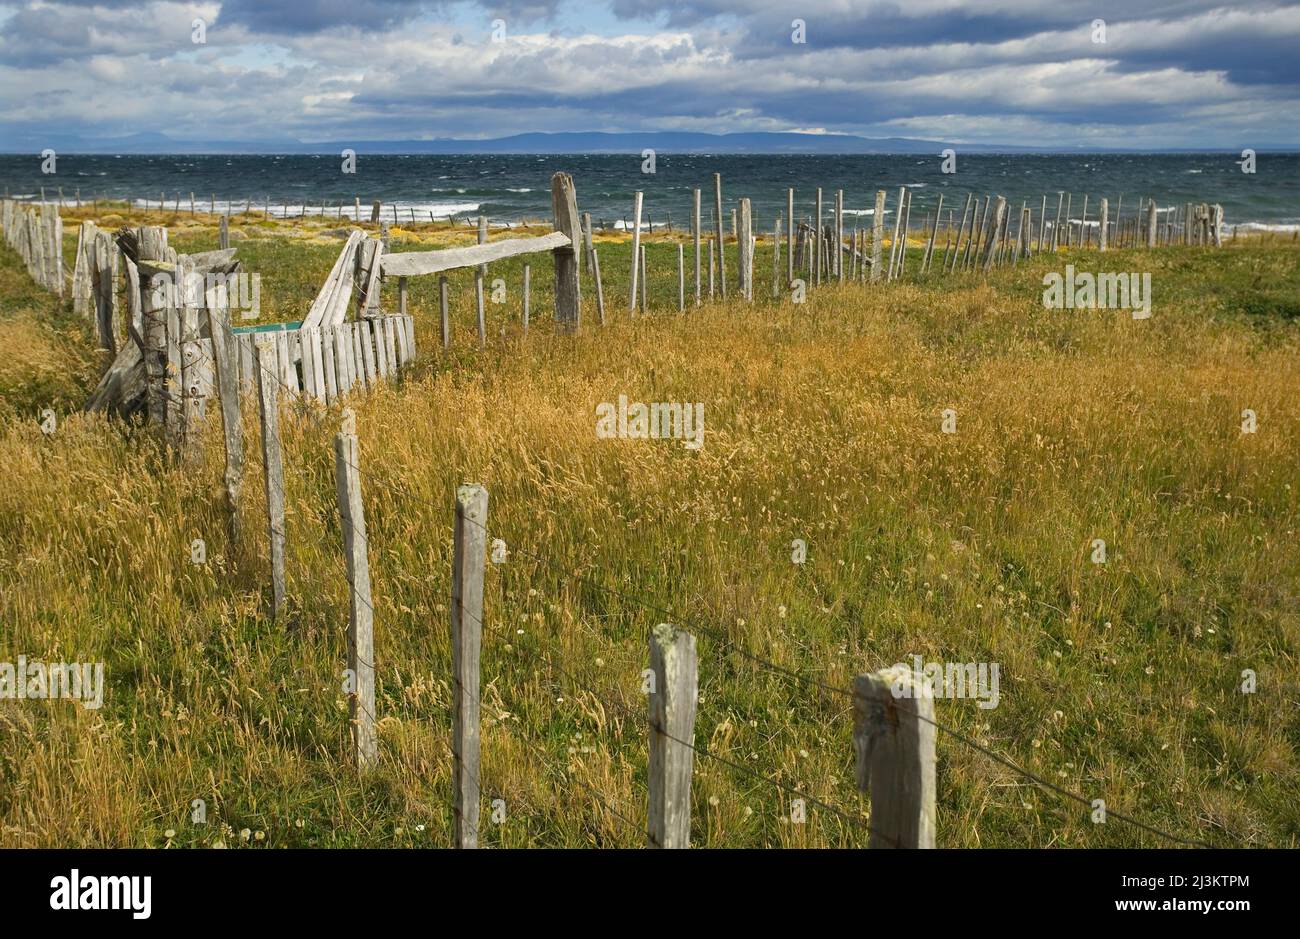 Grass, wildflowers and fence posts along the coast on Seno Otway, near Punta Arenas, Chile; Patagonia, Chile Stock Photo